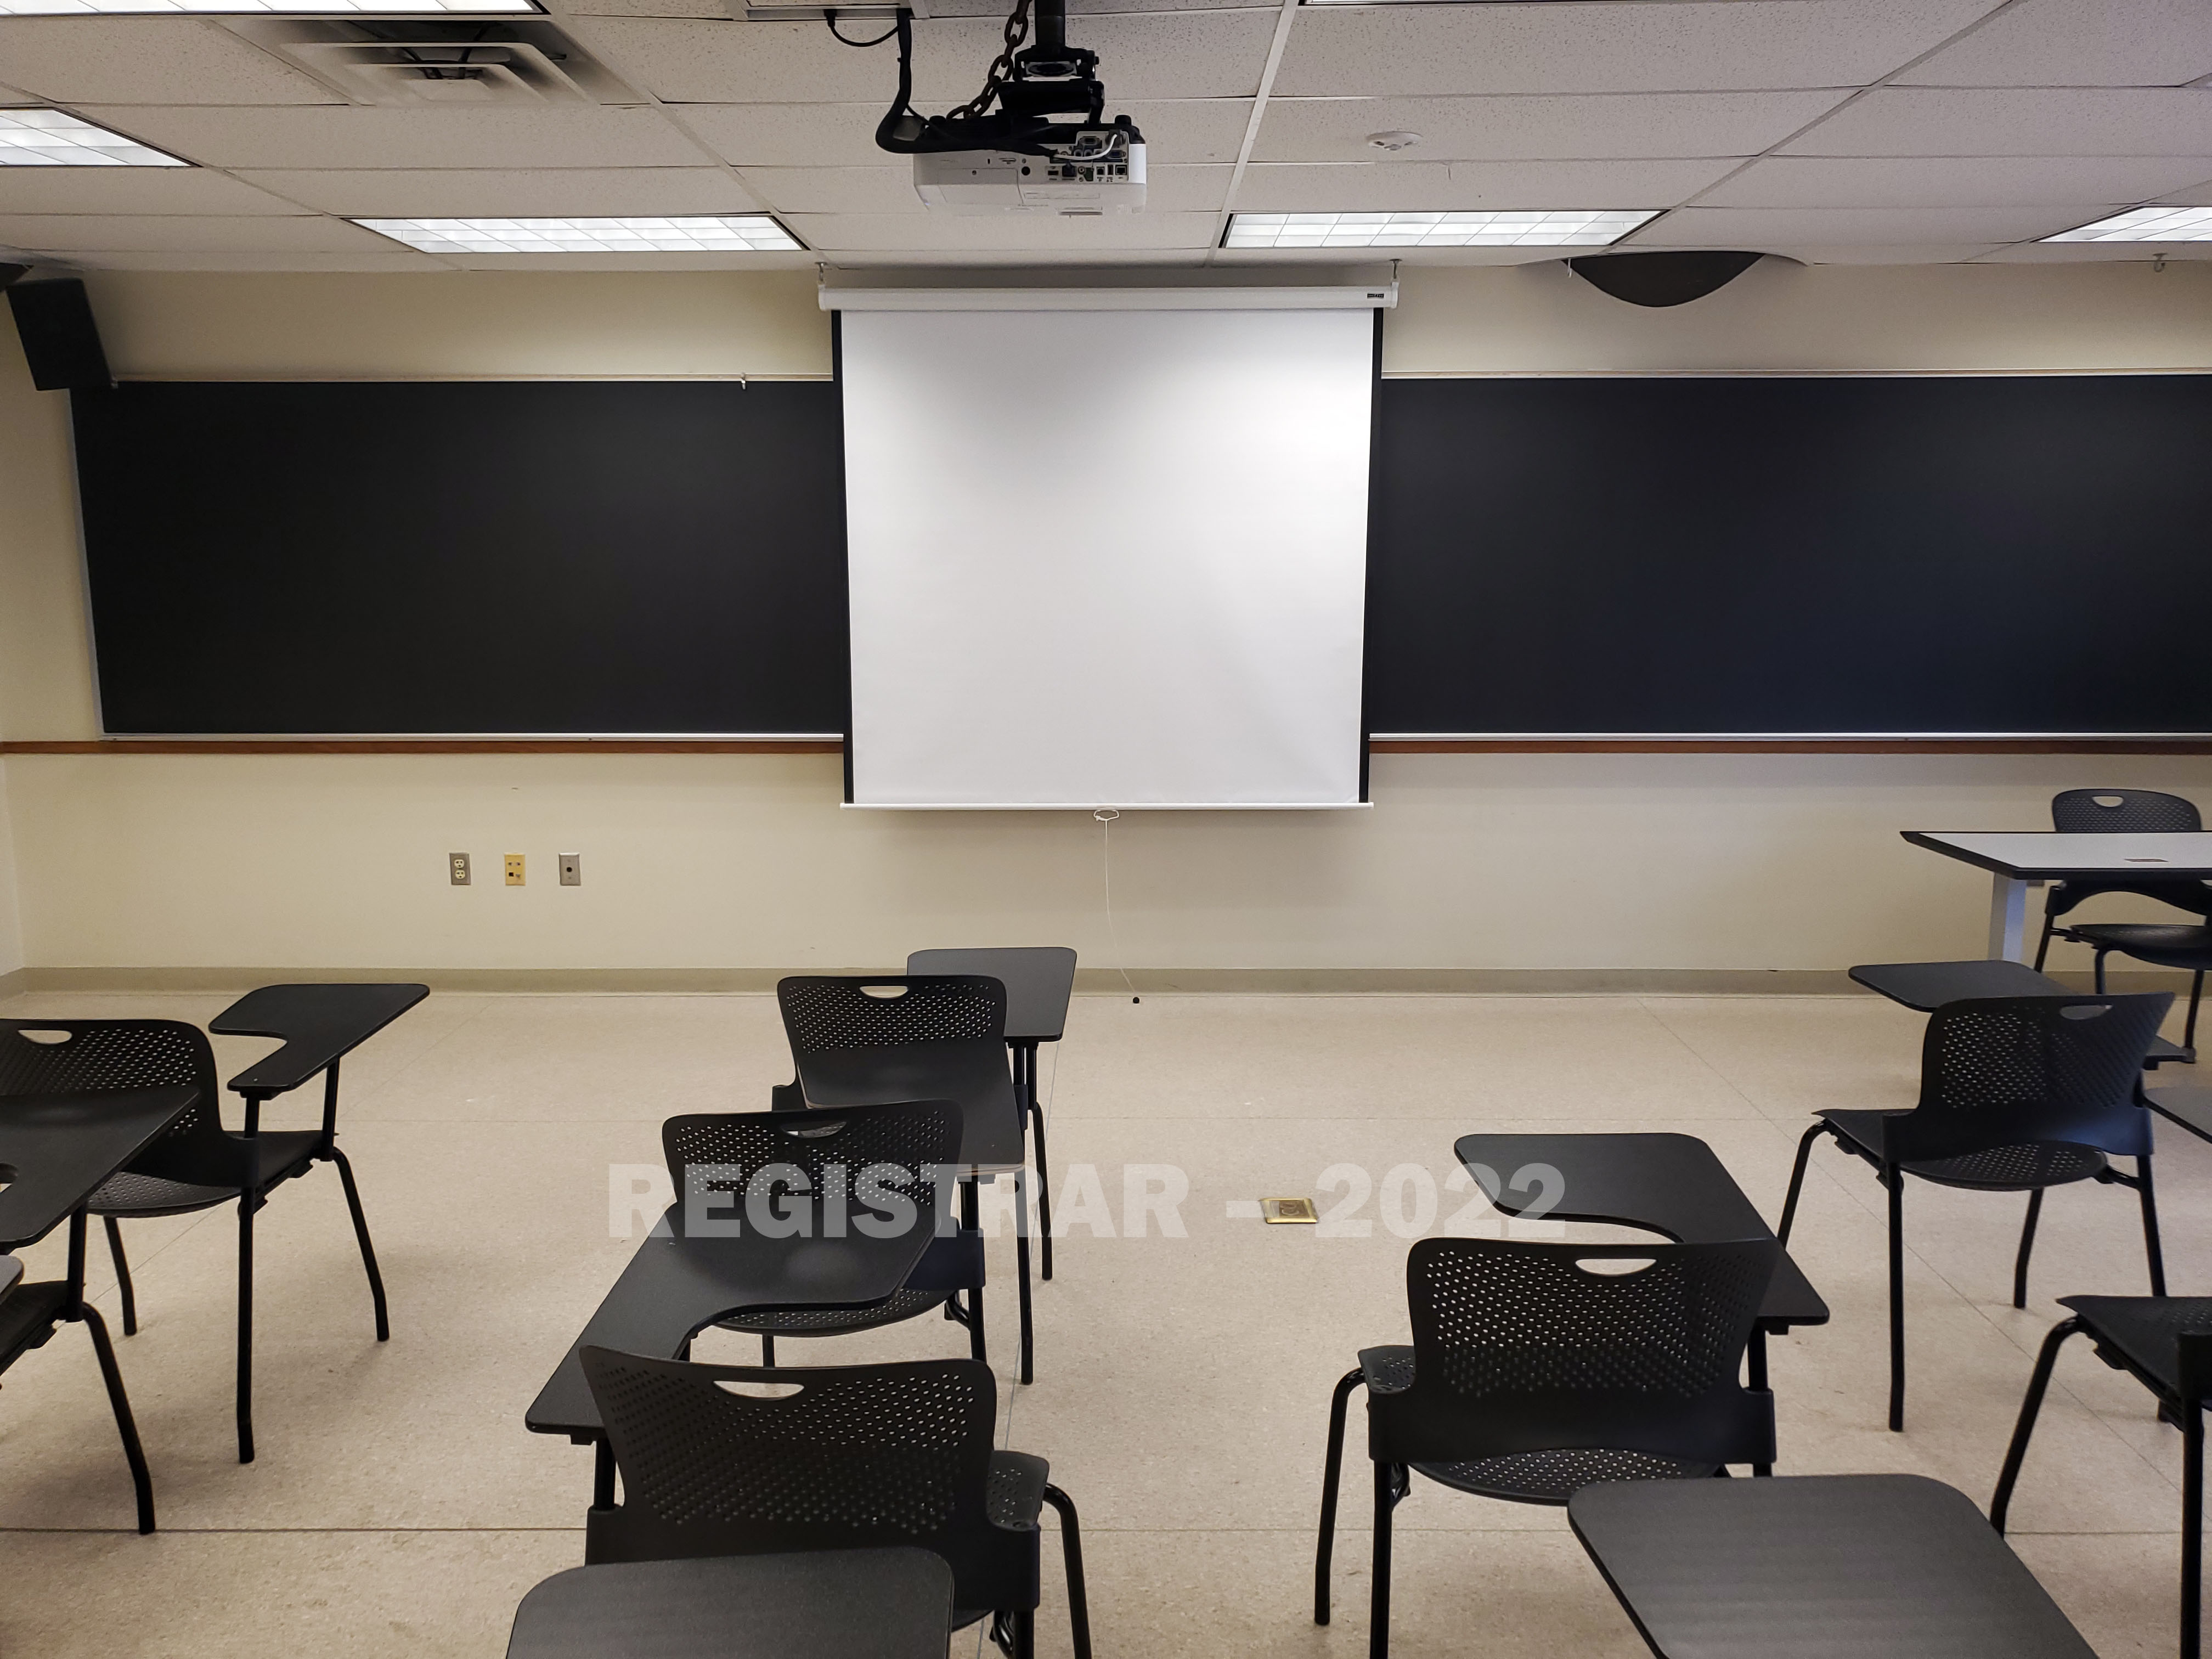 Enarson Classroom Building room 326 view from the back of the room with projector screen down